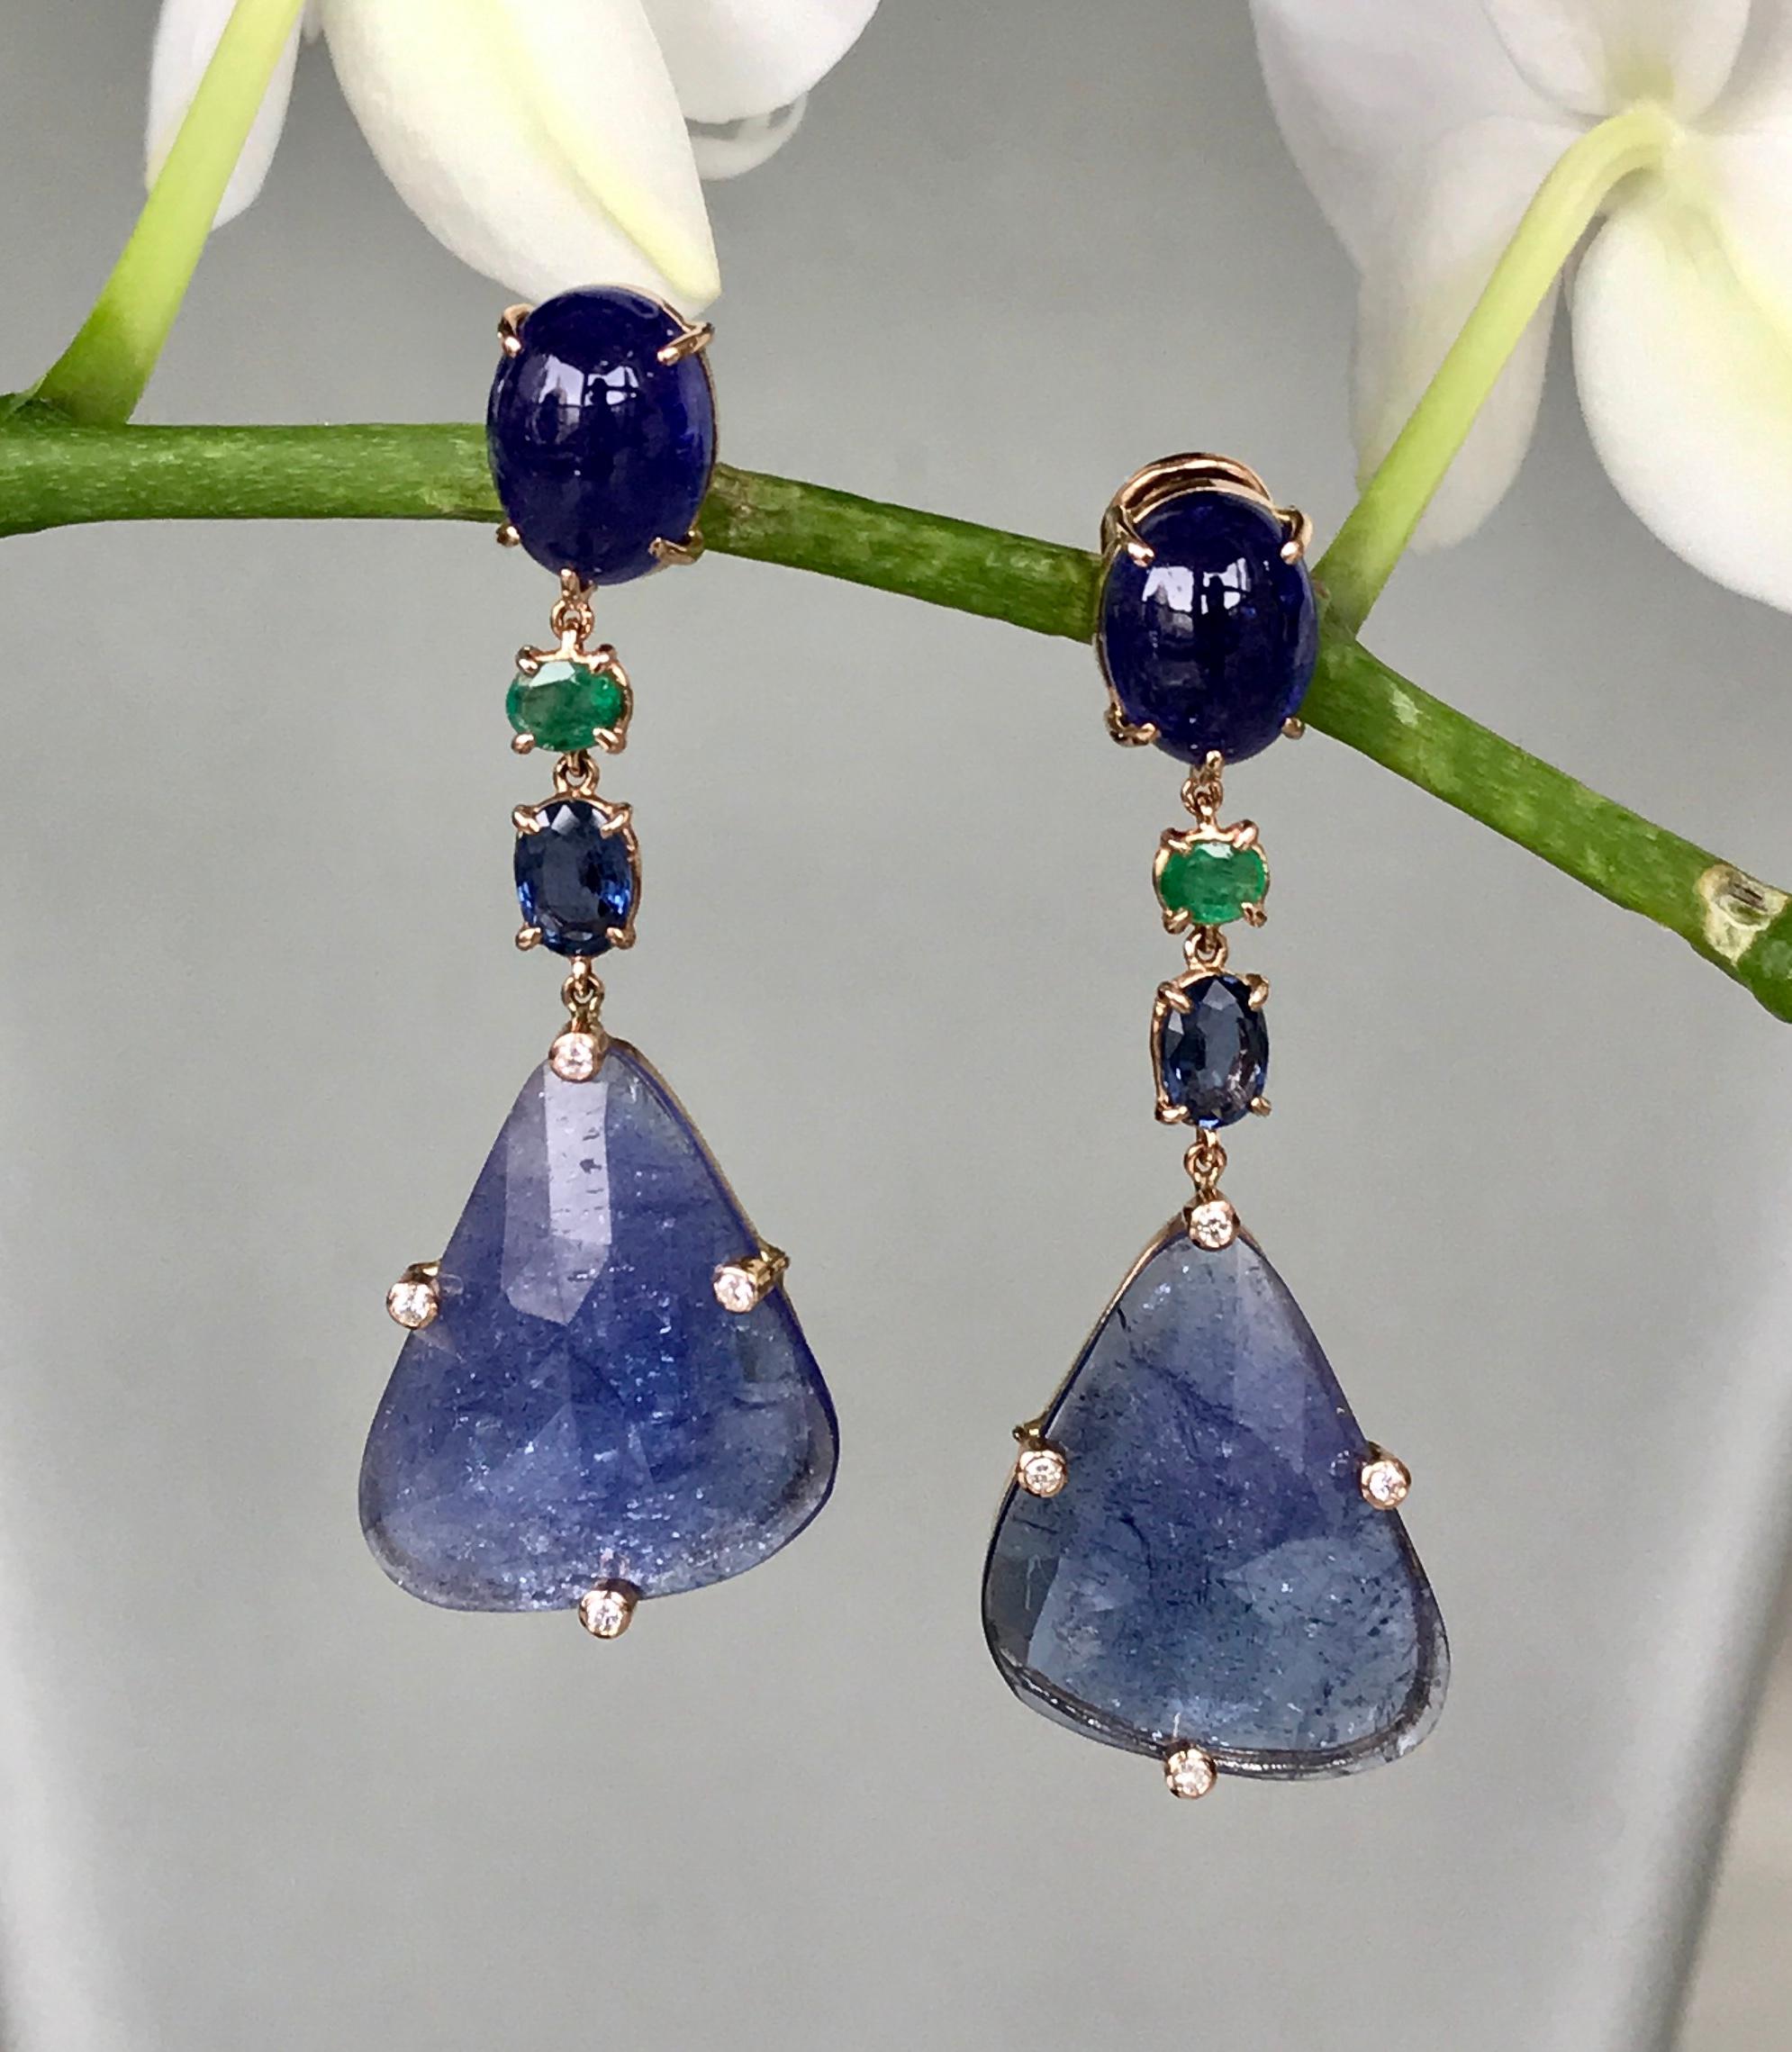 One-of-a-kind dangle earrings of fancy shaped tanzanite slices are topped with oval cabochon tanzanites, with faceted emeralds and blue sapphires, and diamond accents. Handcrafted in 18 karat rose gold.

These luxurious blue and green earrings make